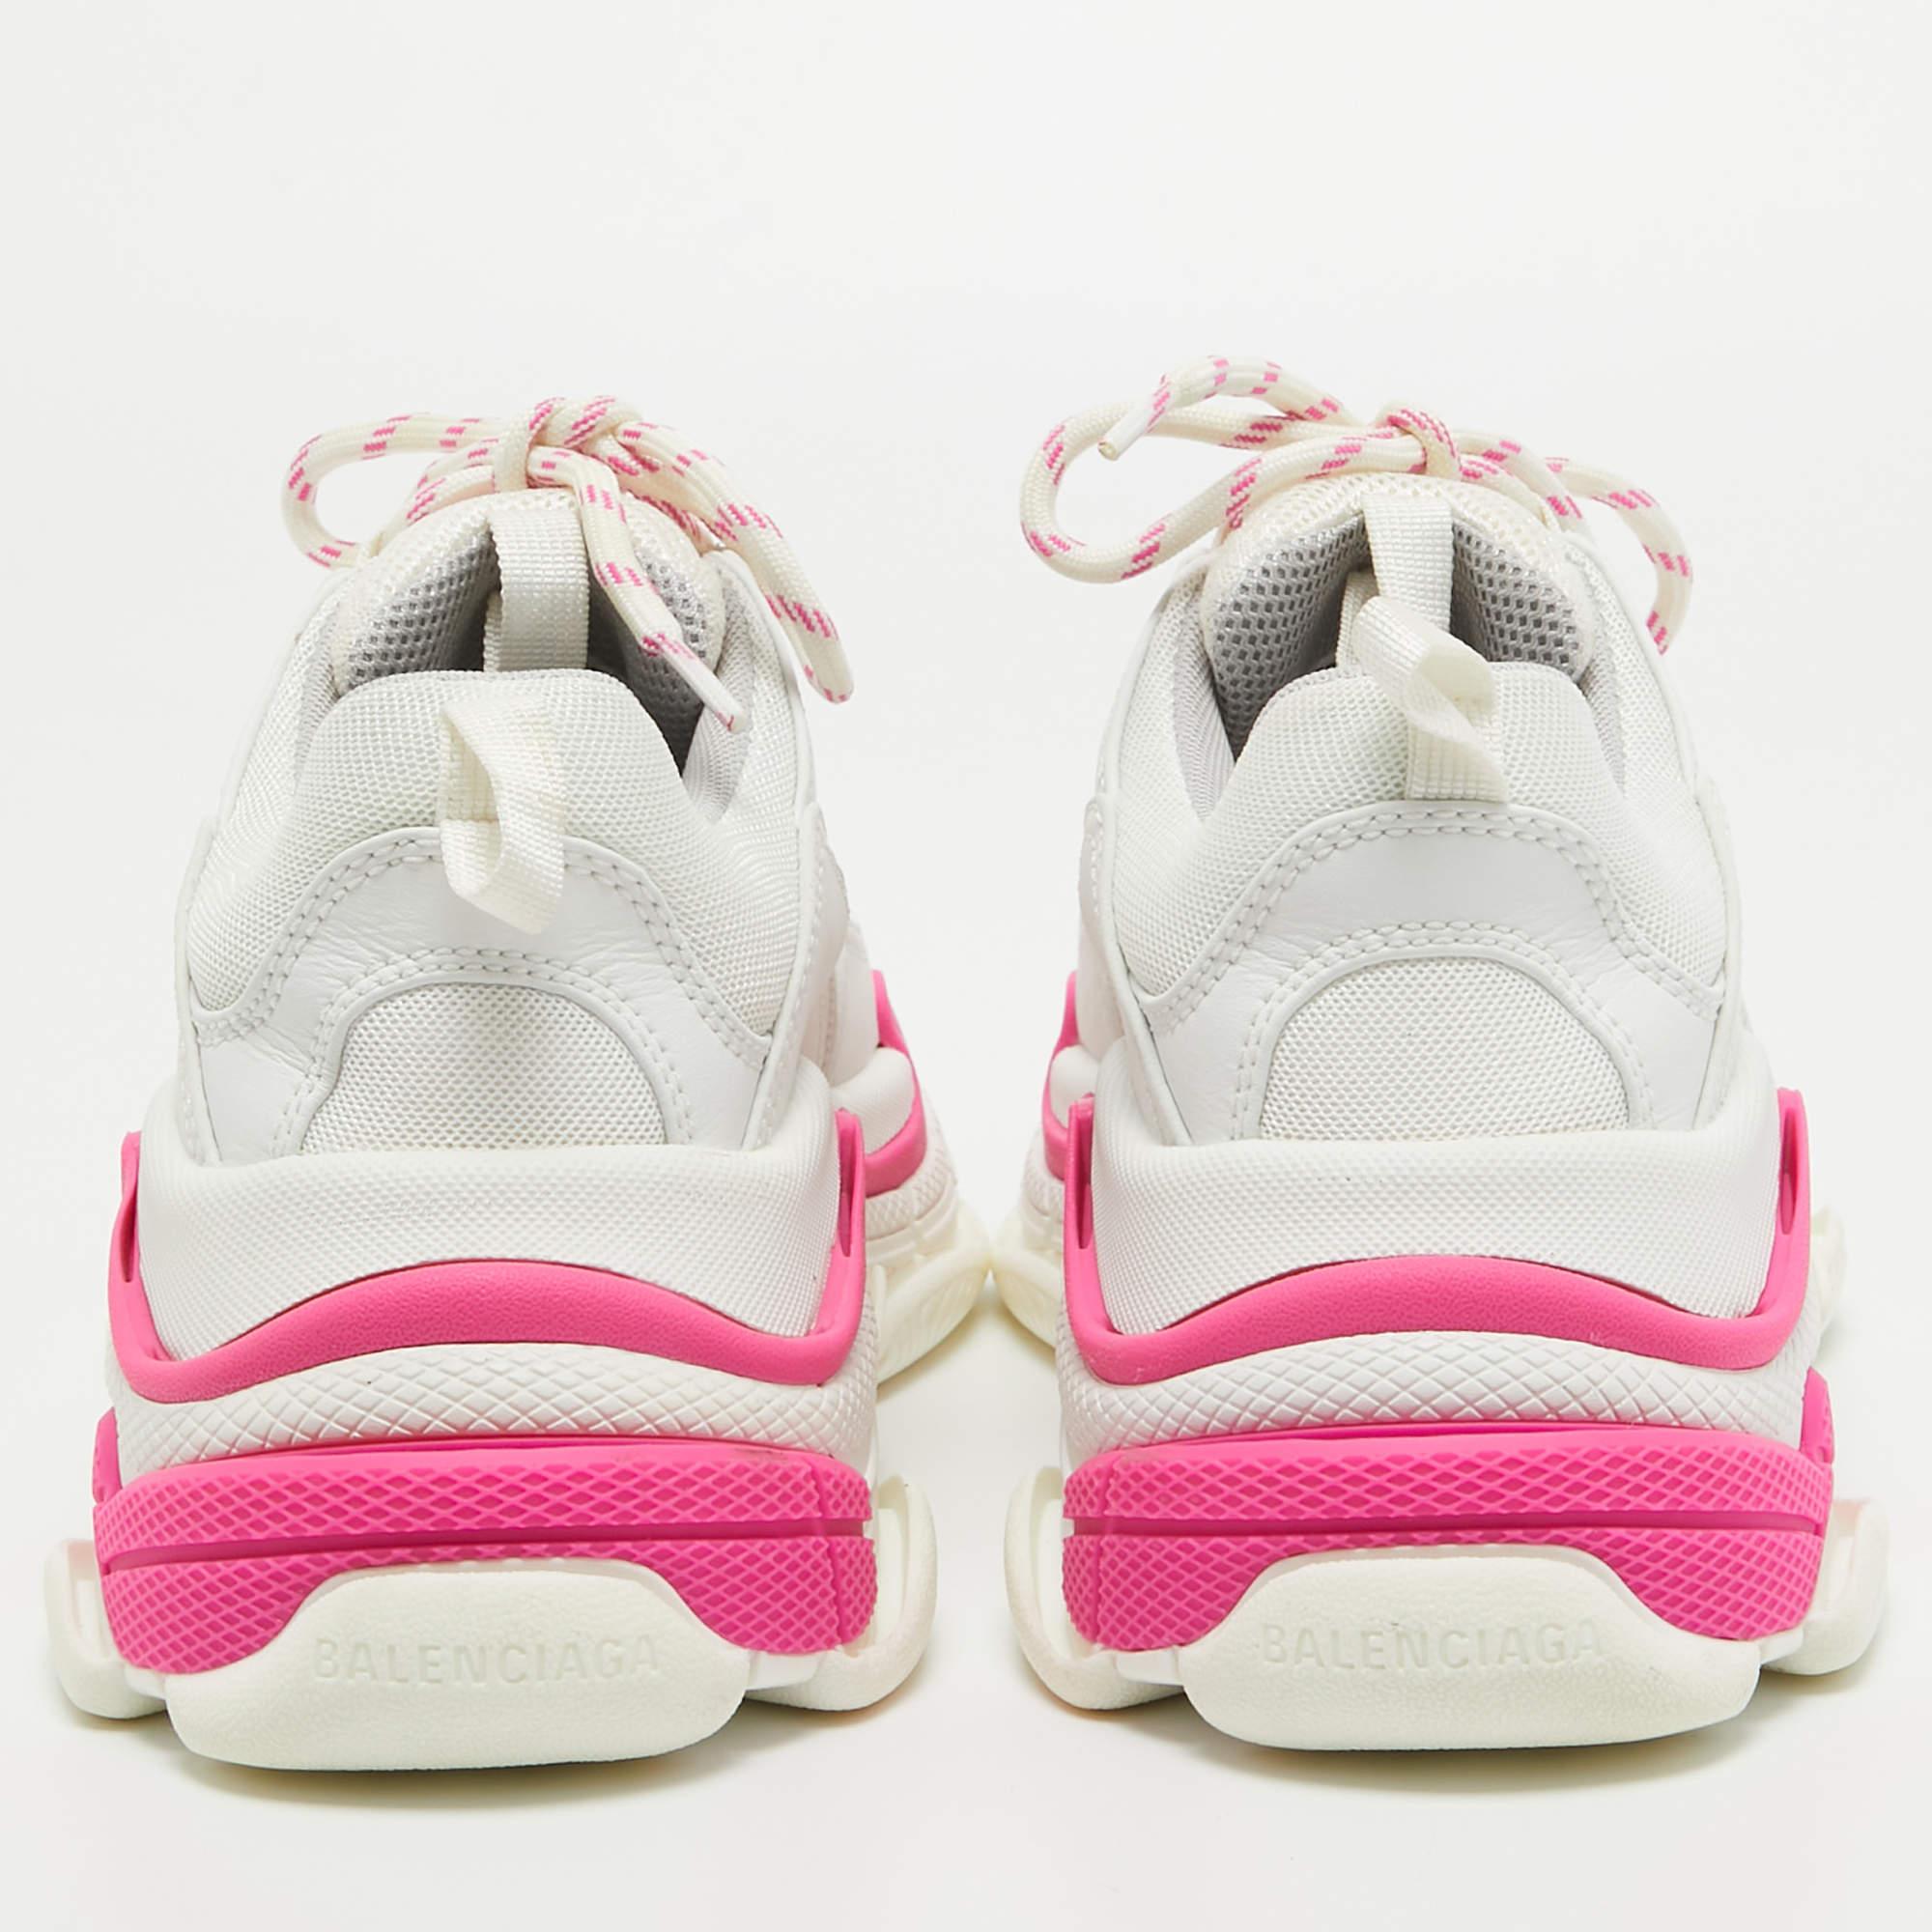 Balenciaga White/Pink Leather and Mesh Triple S Sneakers Size 39 2